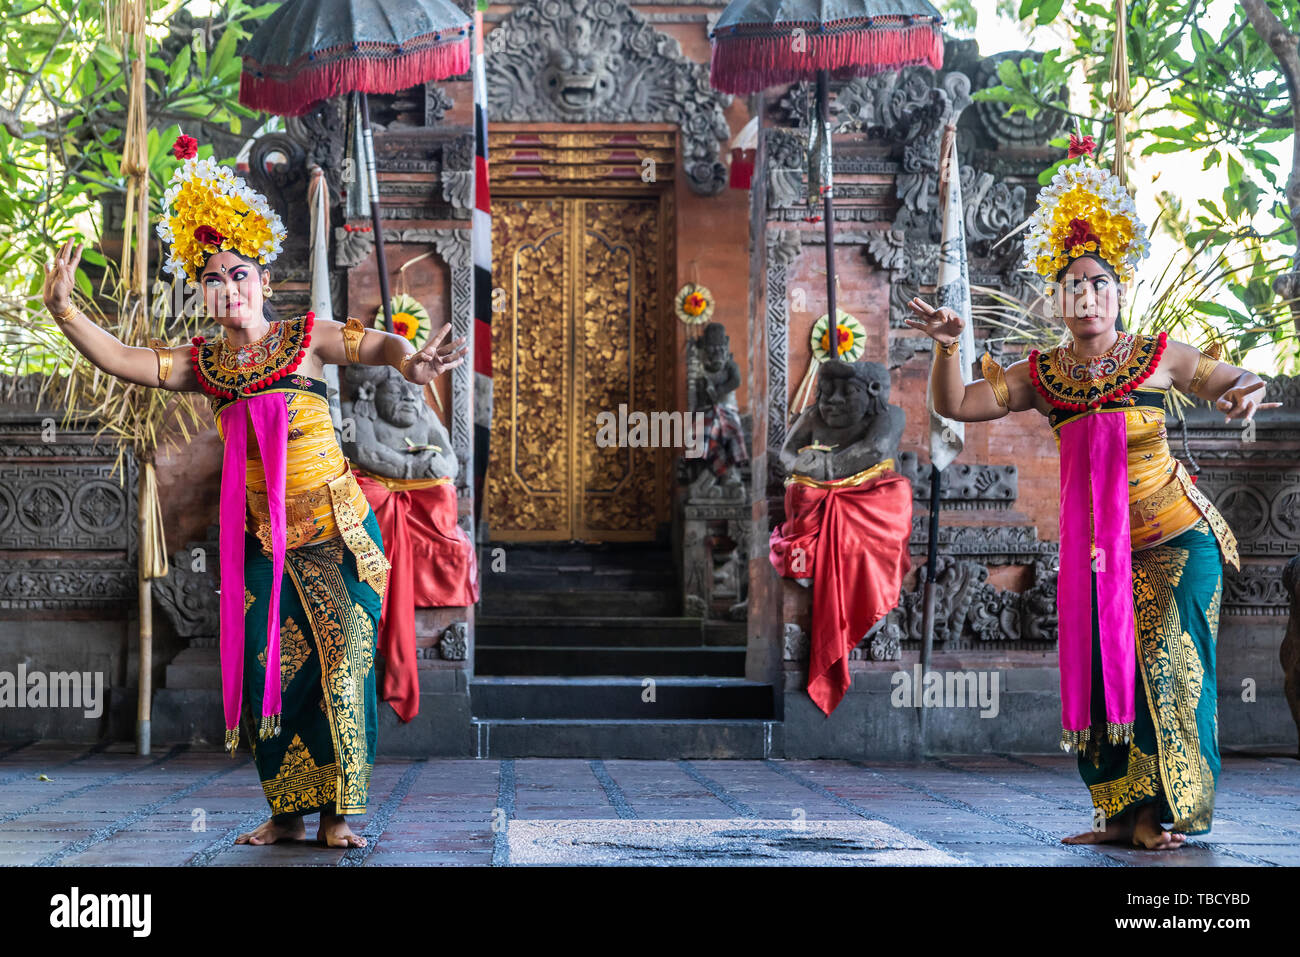 Banjar Gelulung, Bali, Indonesia - February 26, 2019: Mas Village. Play on  stage setting. Two women with head ornaments and traditional dress with pin  Stock Photo - Alamy